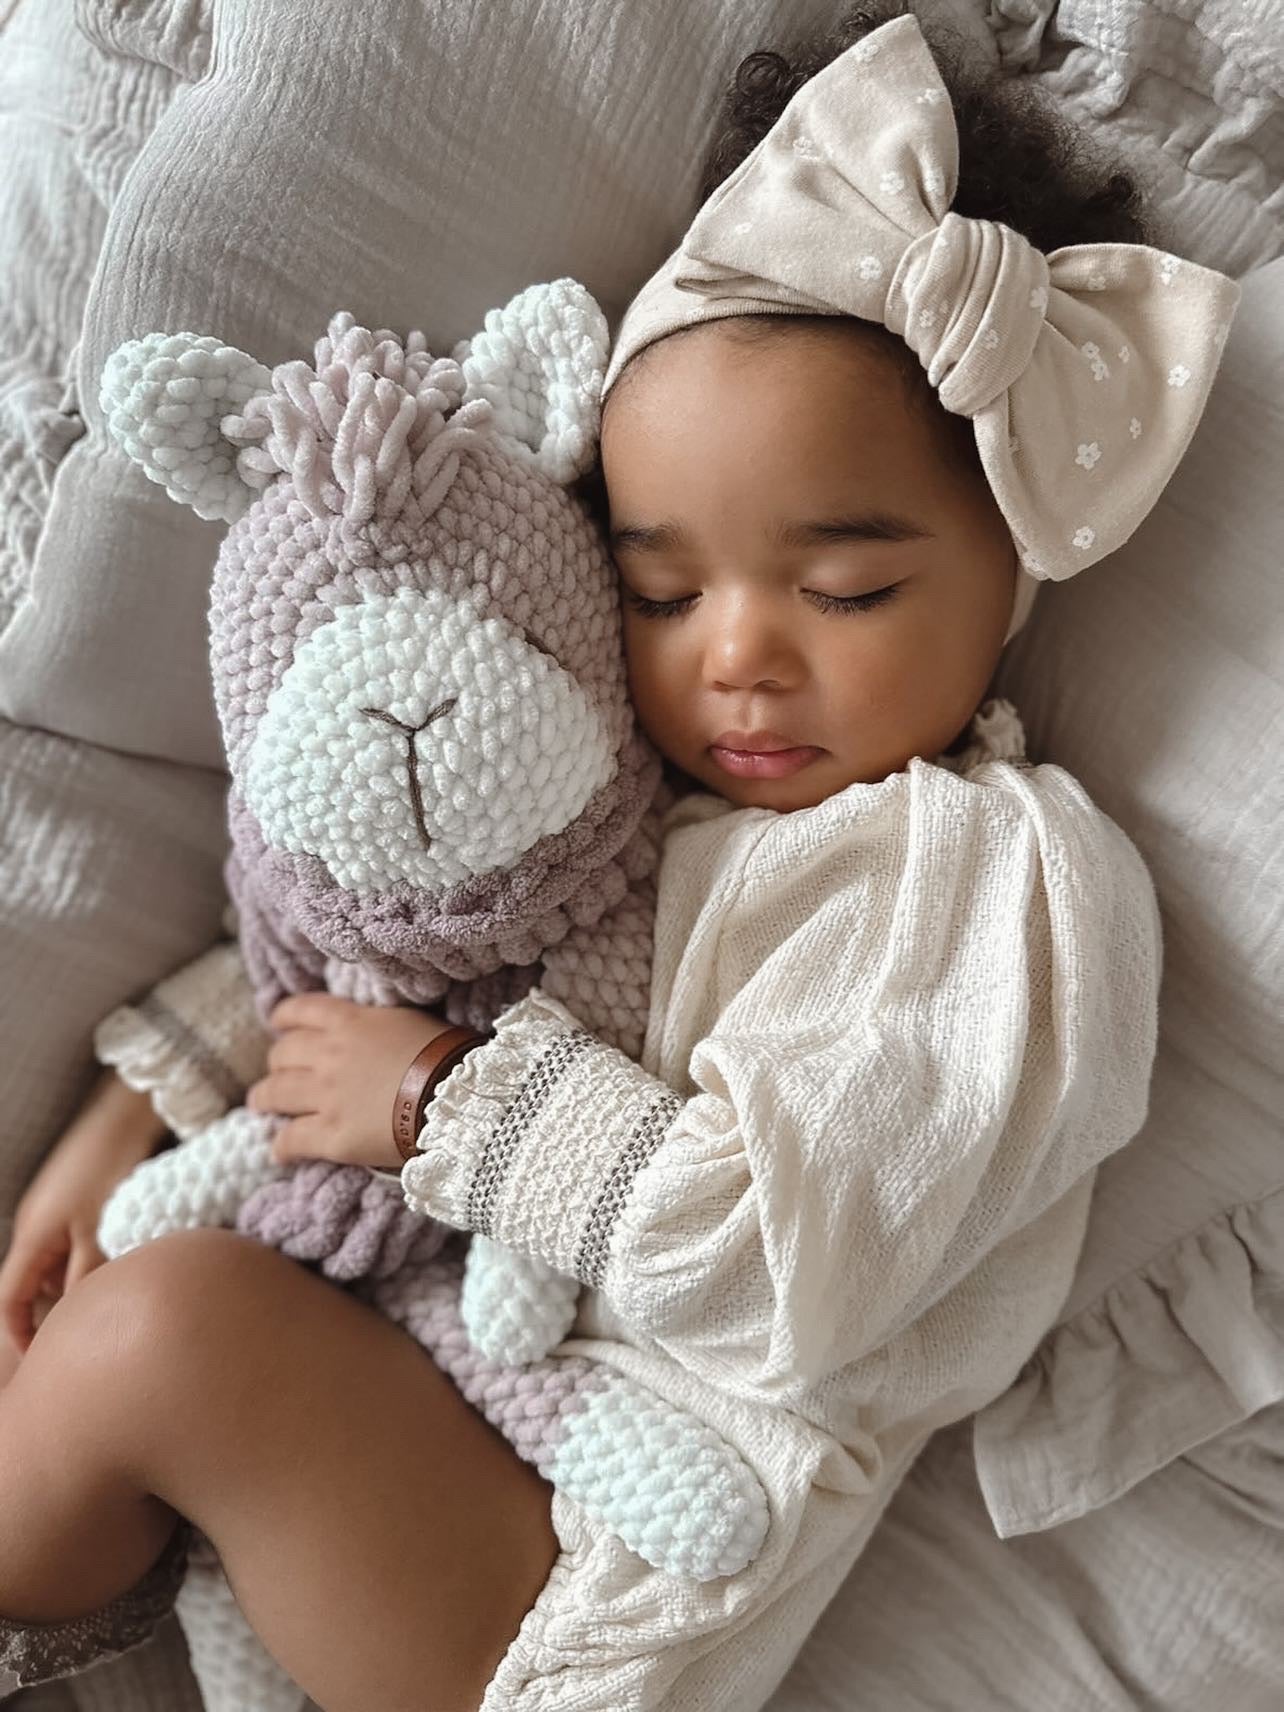  baby laying on a bed next to a stuffed alpaca toy in neutral colours.